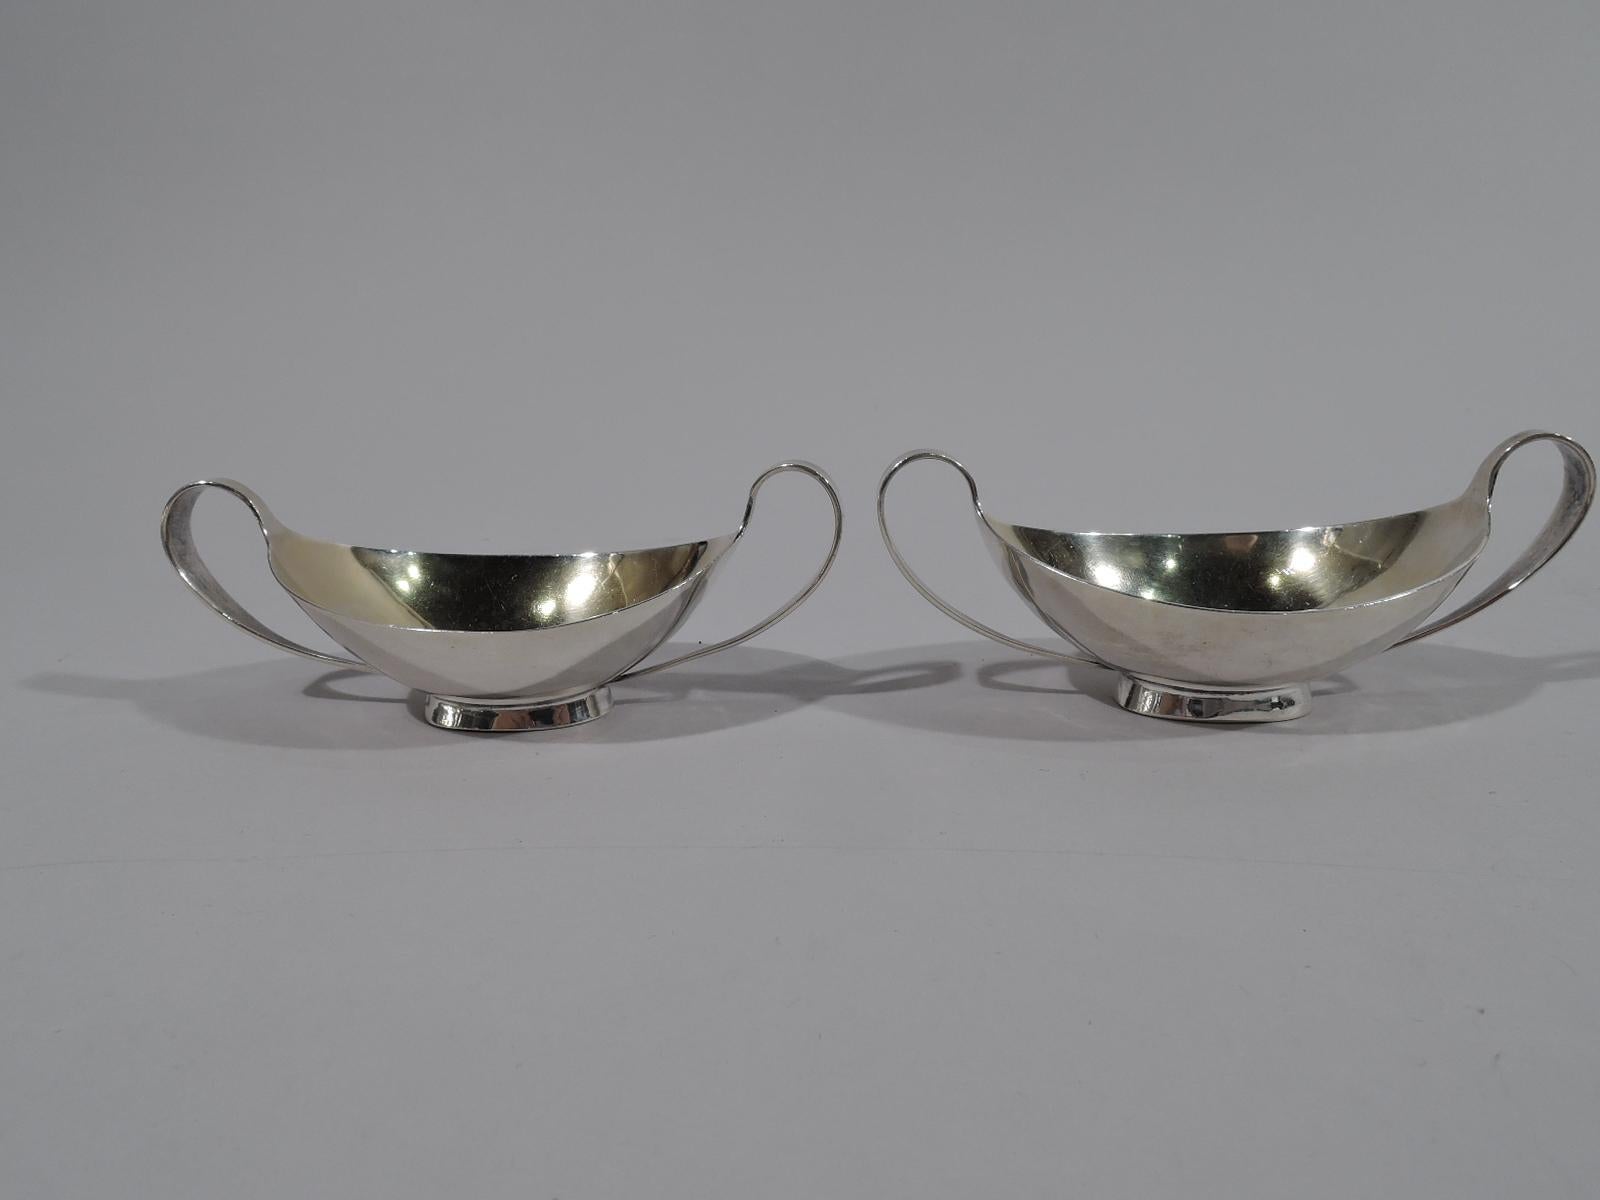 Pair of Classical sterling silver open salts. Made by Arthur stone in gardner, mass. Each: Ovoid with high looping end handles terminating at spread oval foot. Interior gilt washed. Fully marked including initial P, which represents either one